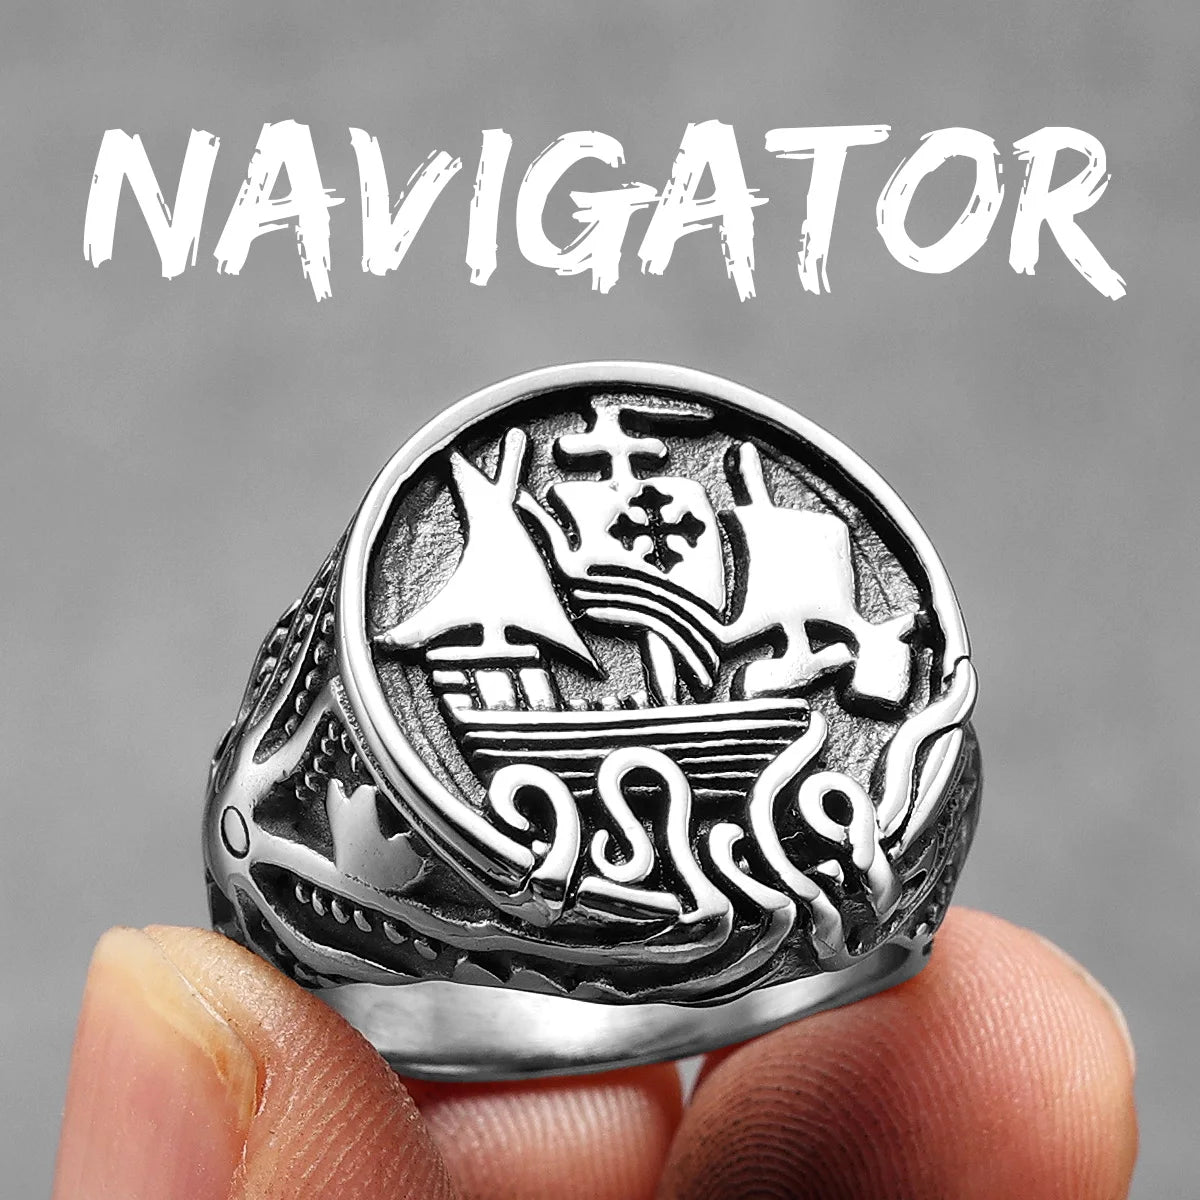 Anchor Lighthouse Ocean Sailor Ship Men Rings Stainless Steel Women Jewelry Vintage Punk Rock Fashion Accessories Gift R1199-Navigator